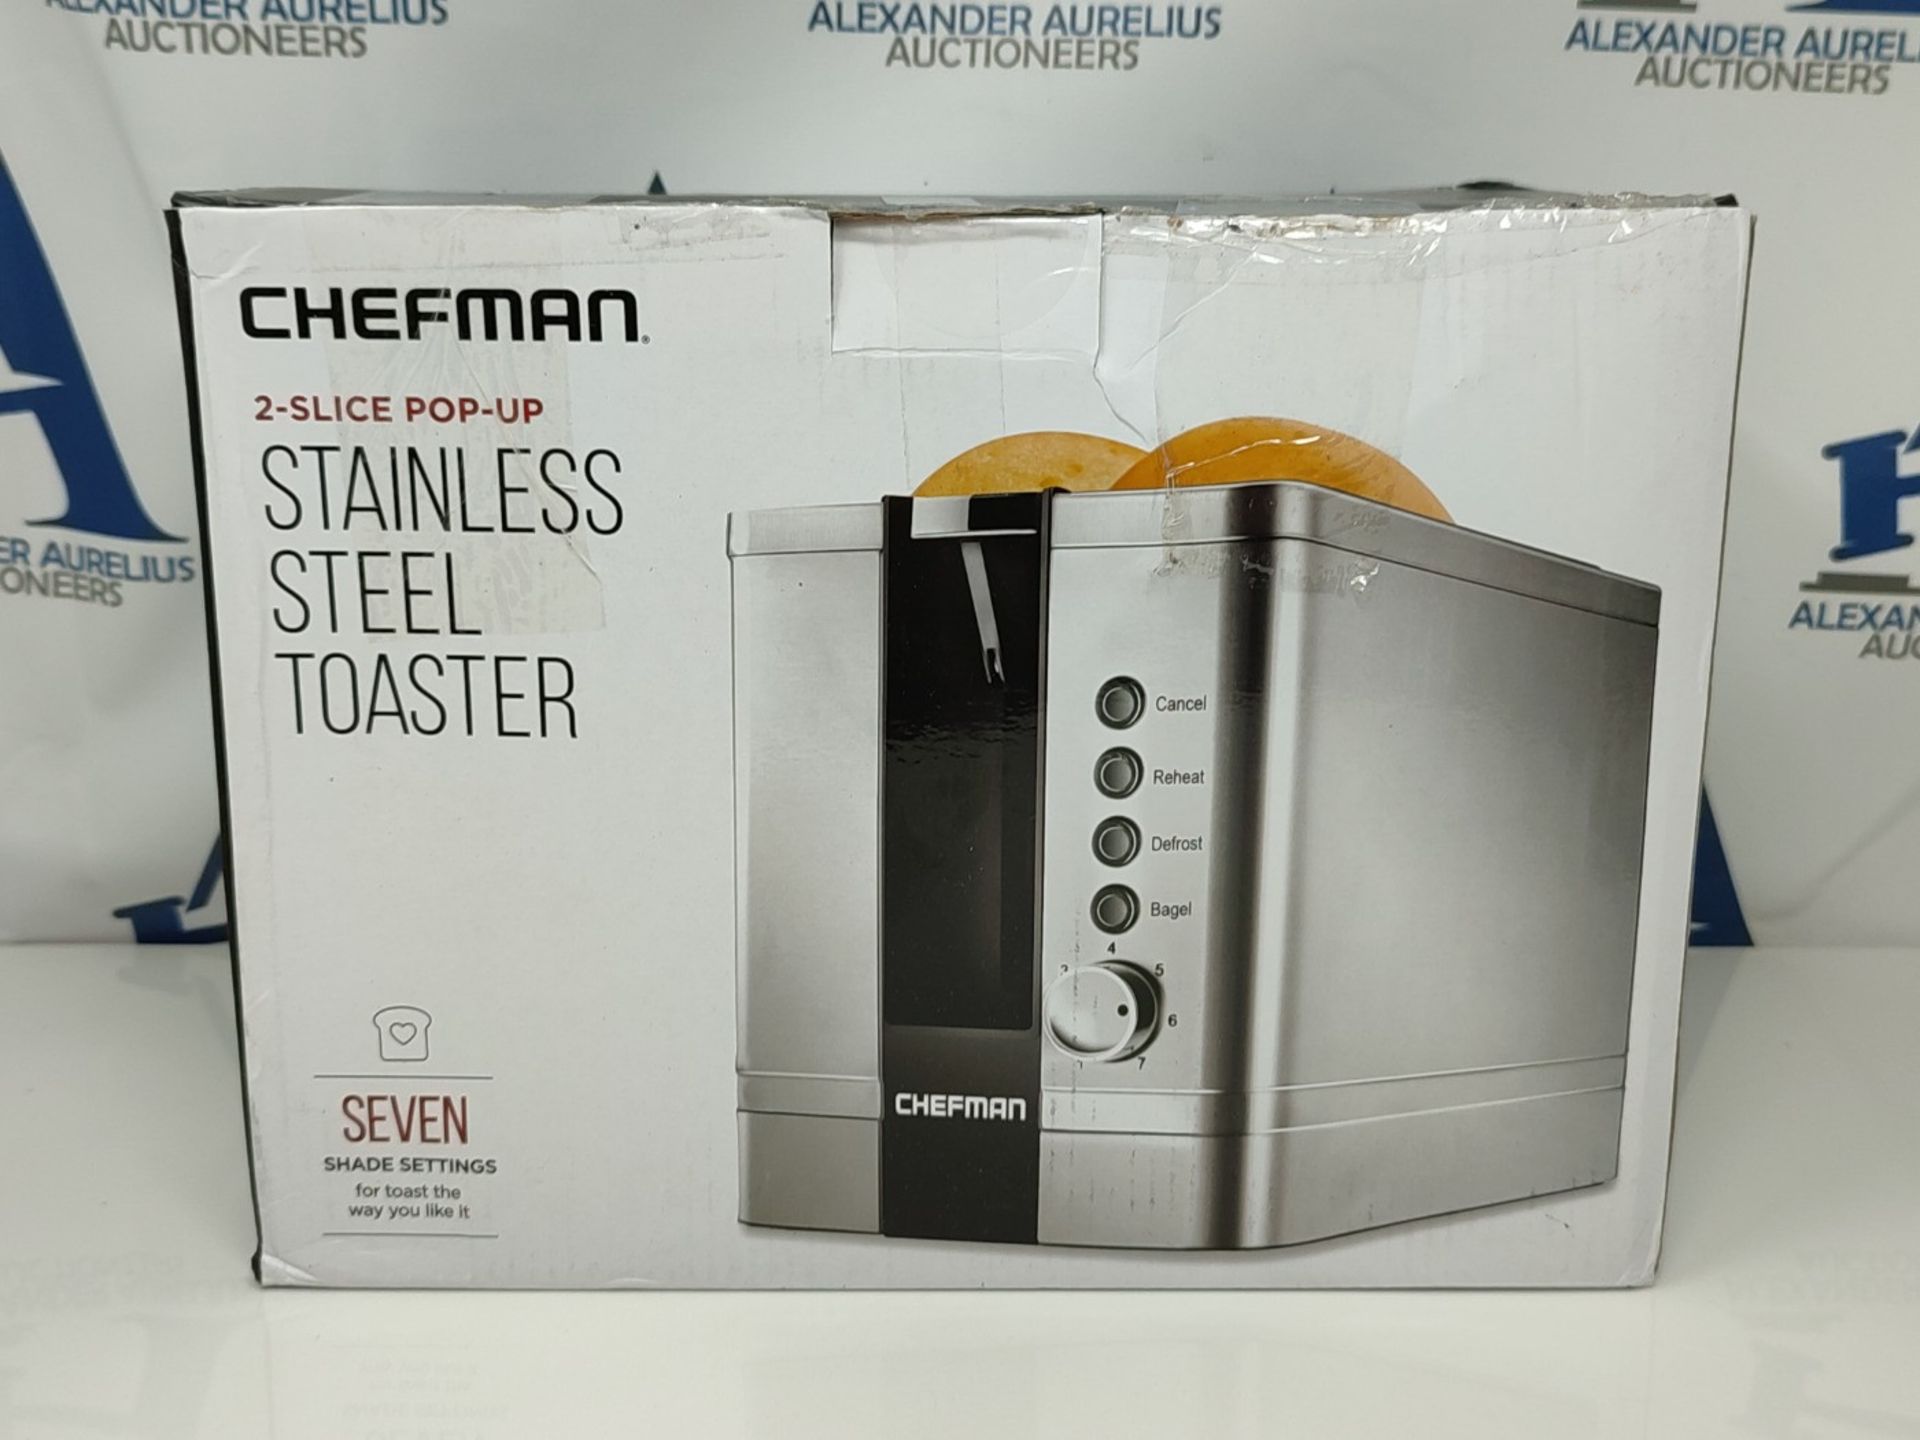 Chefman 2 Slice Toaster, 7 Shade Settings, Stainless Steel Toaster 2 Slice with Extra- - Image 3 of 3